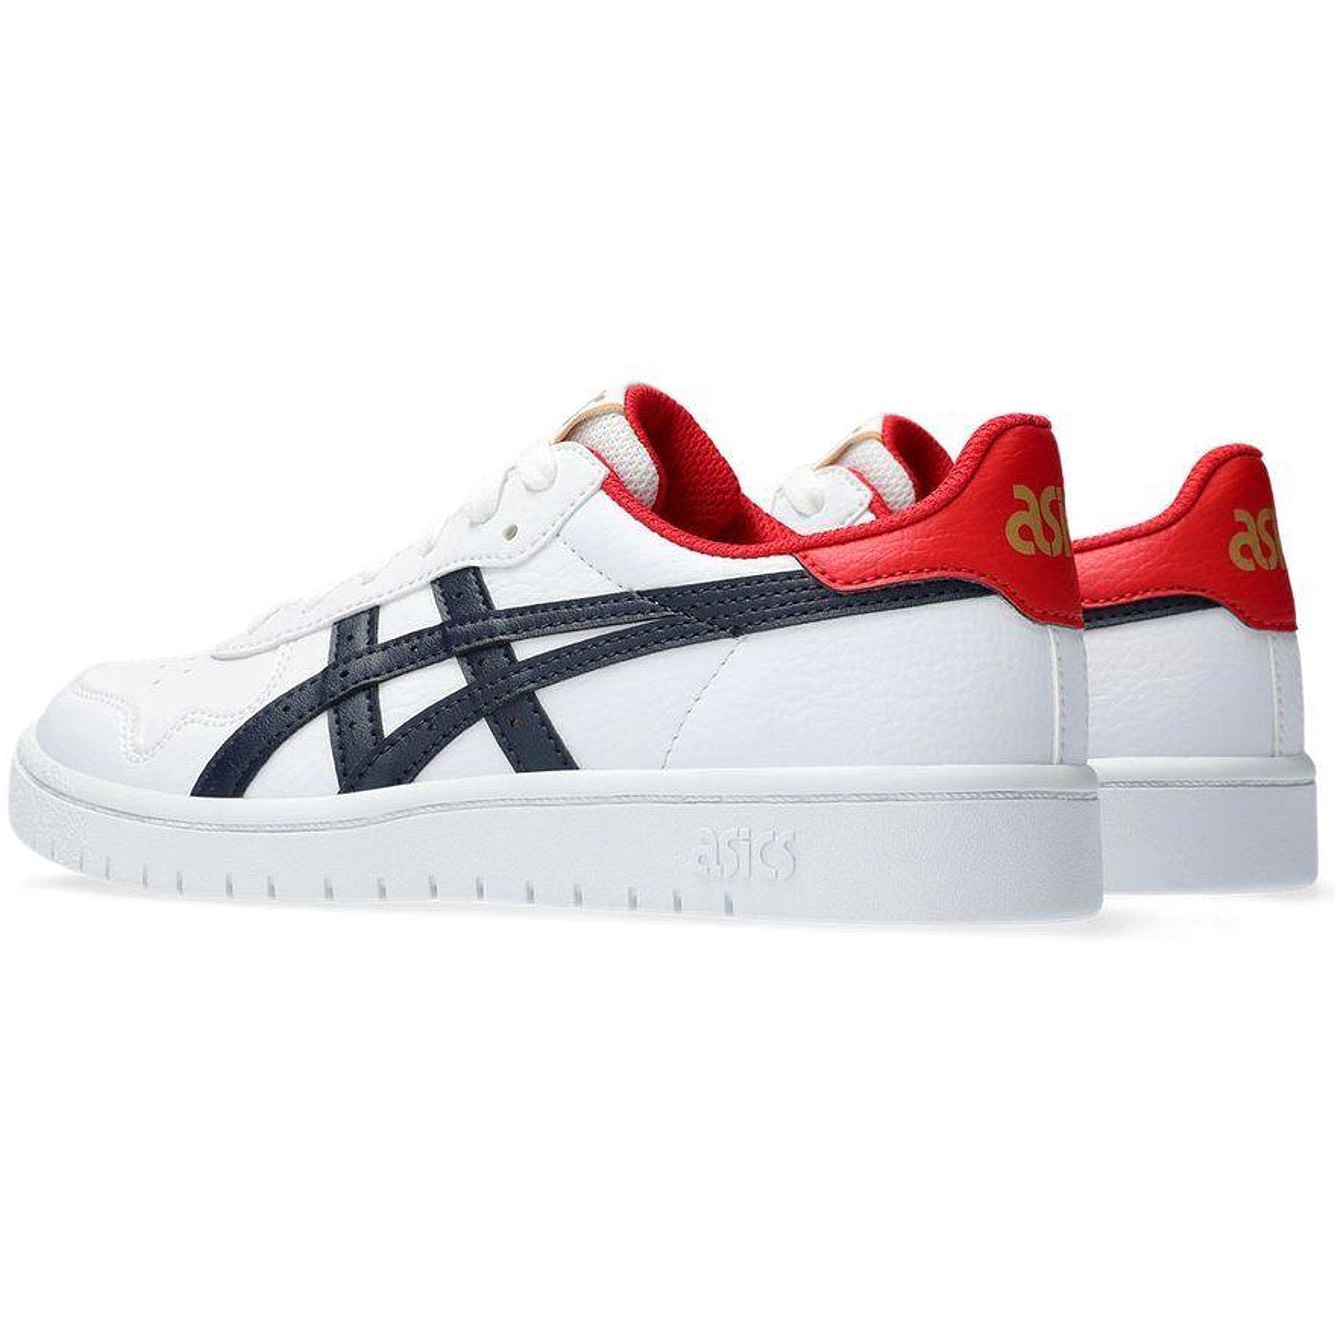 ASICS Japan S White Classic Red 1204A007 118